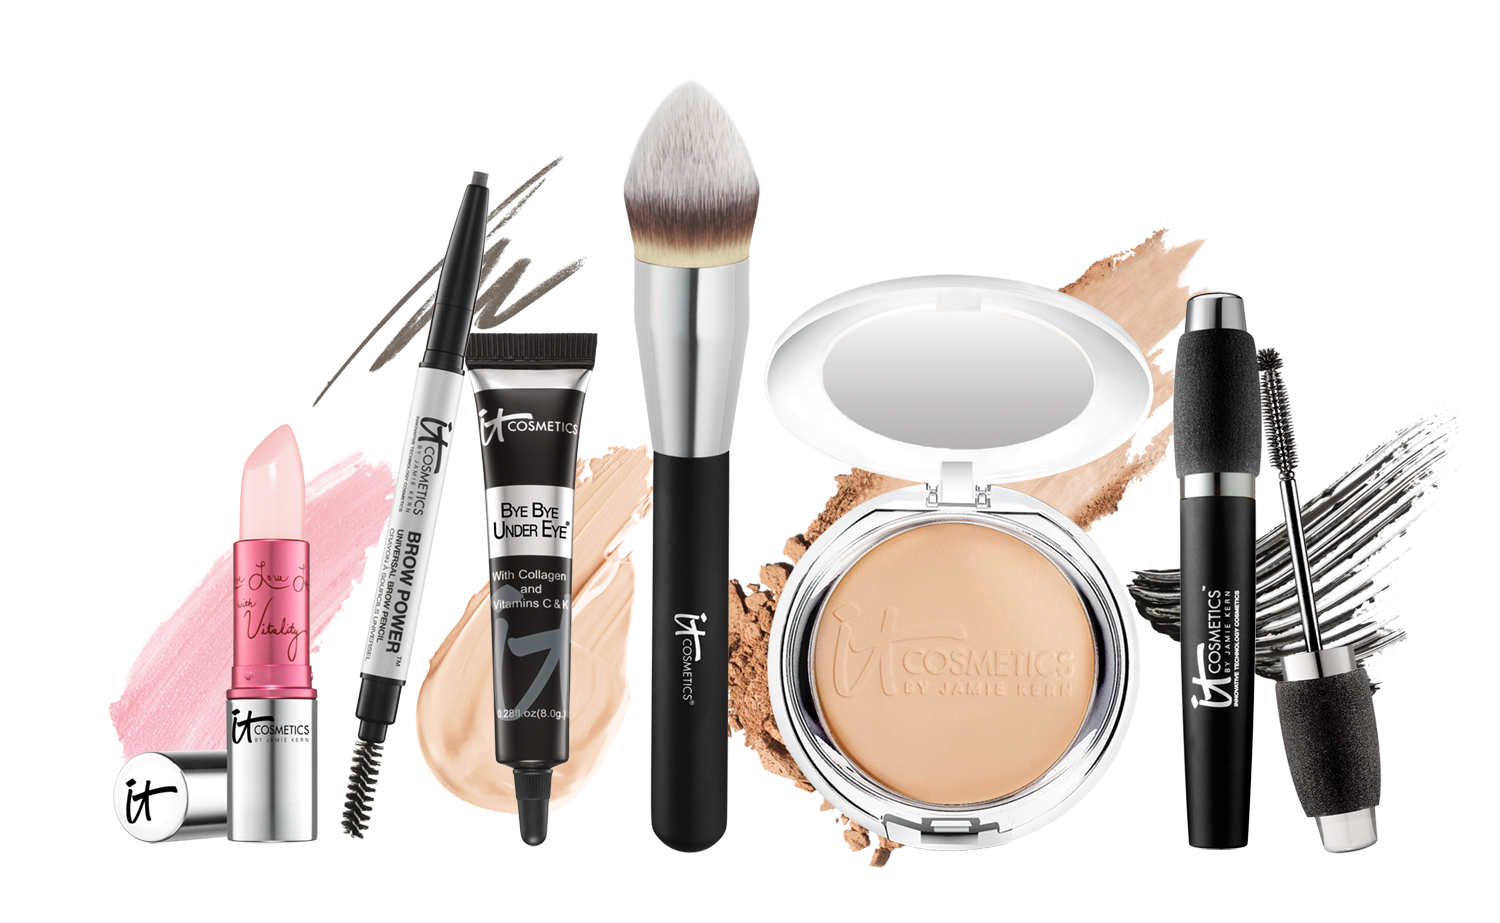 Review, Shades, IT, Cosmetics, Holiday, 2015, Makeup, Collection, Best, Selling, QVC, Products, Eyeshadow, Palettes, Lip, Sets